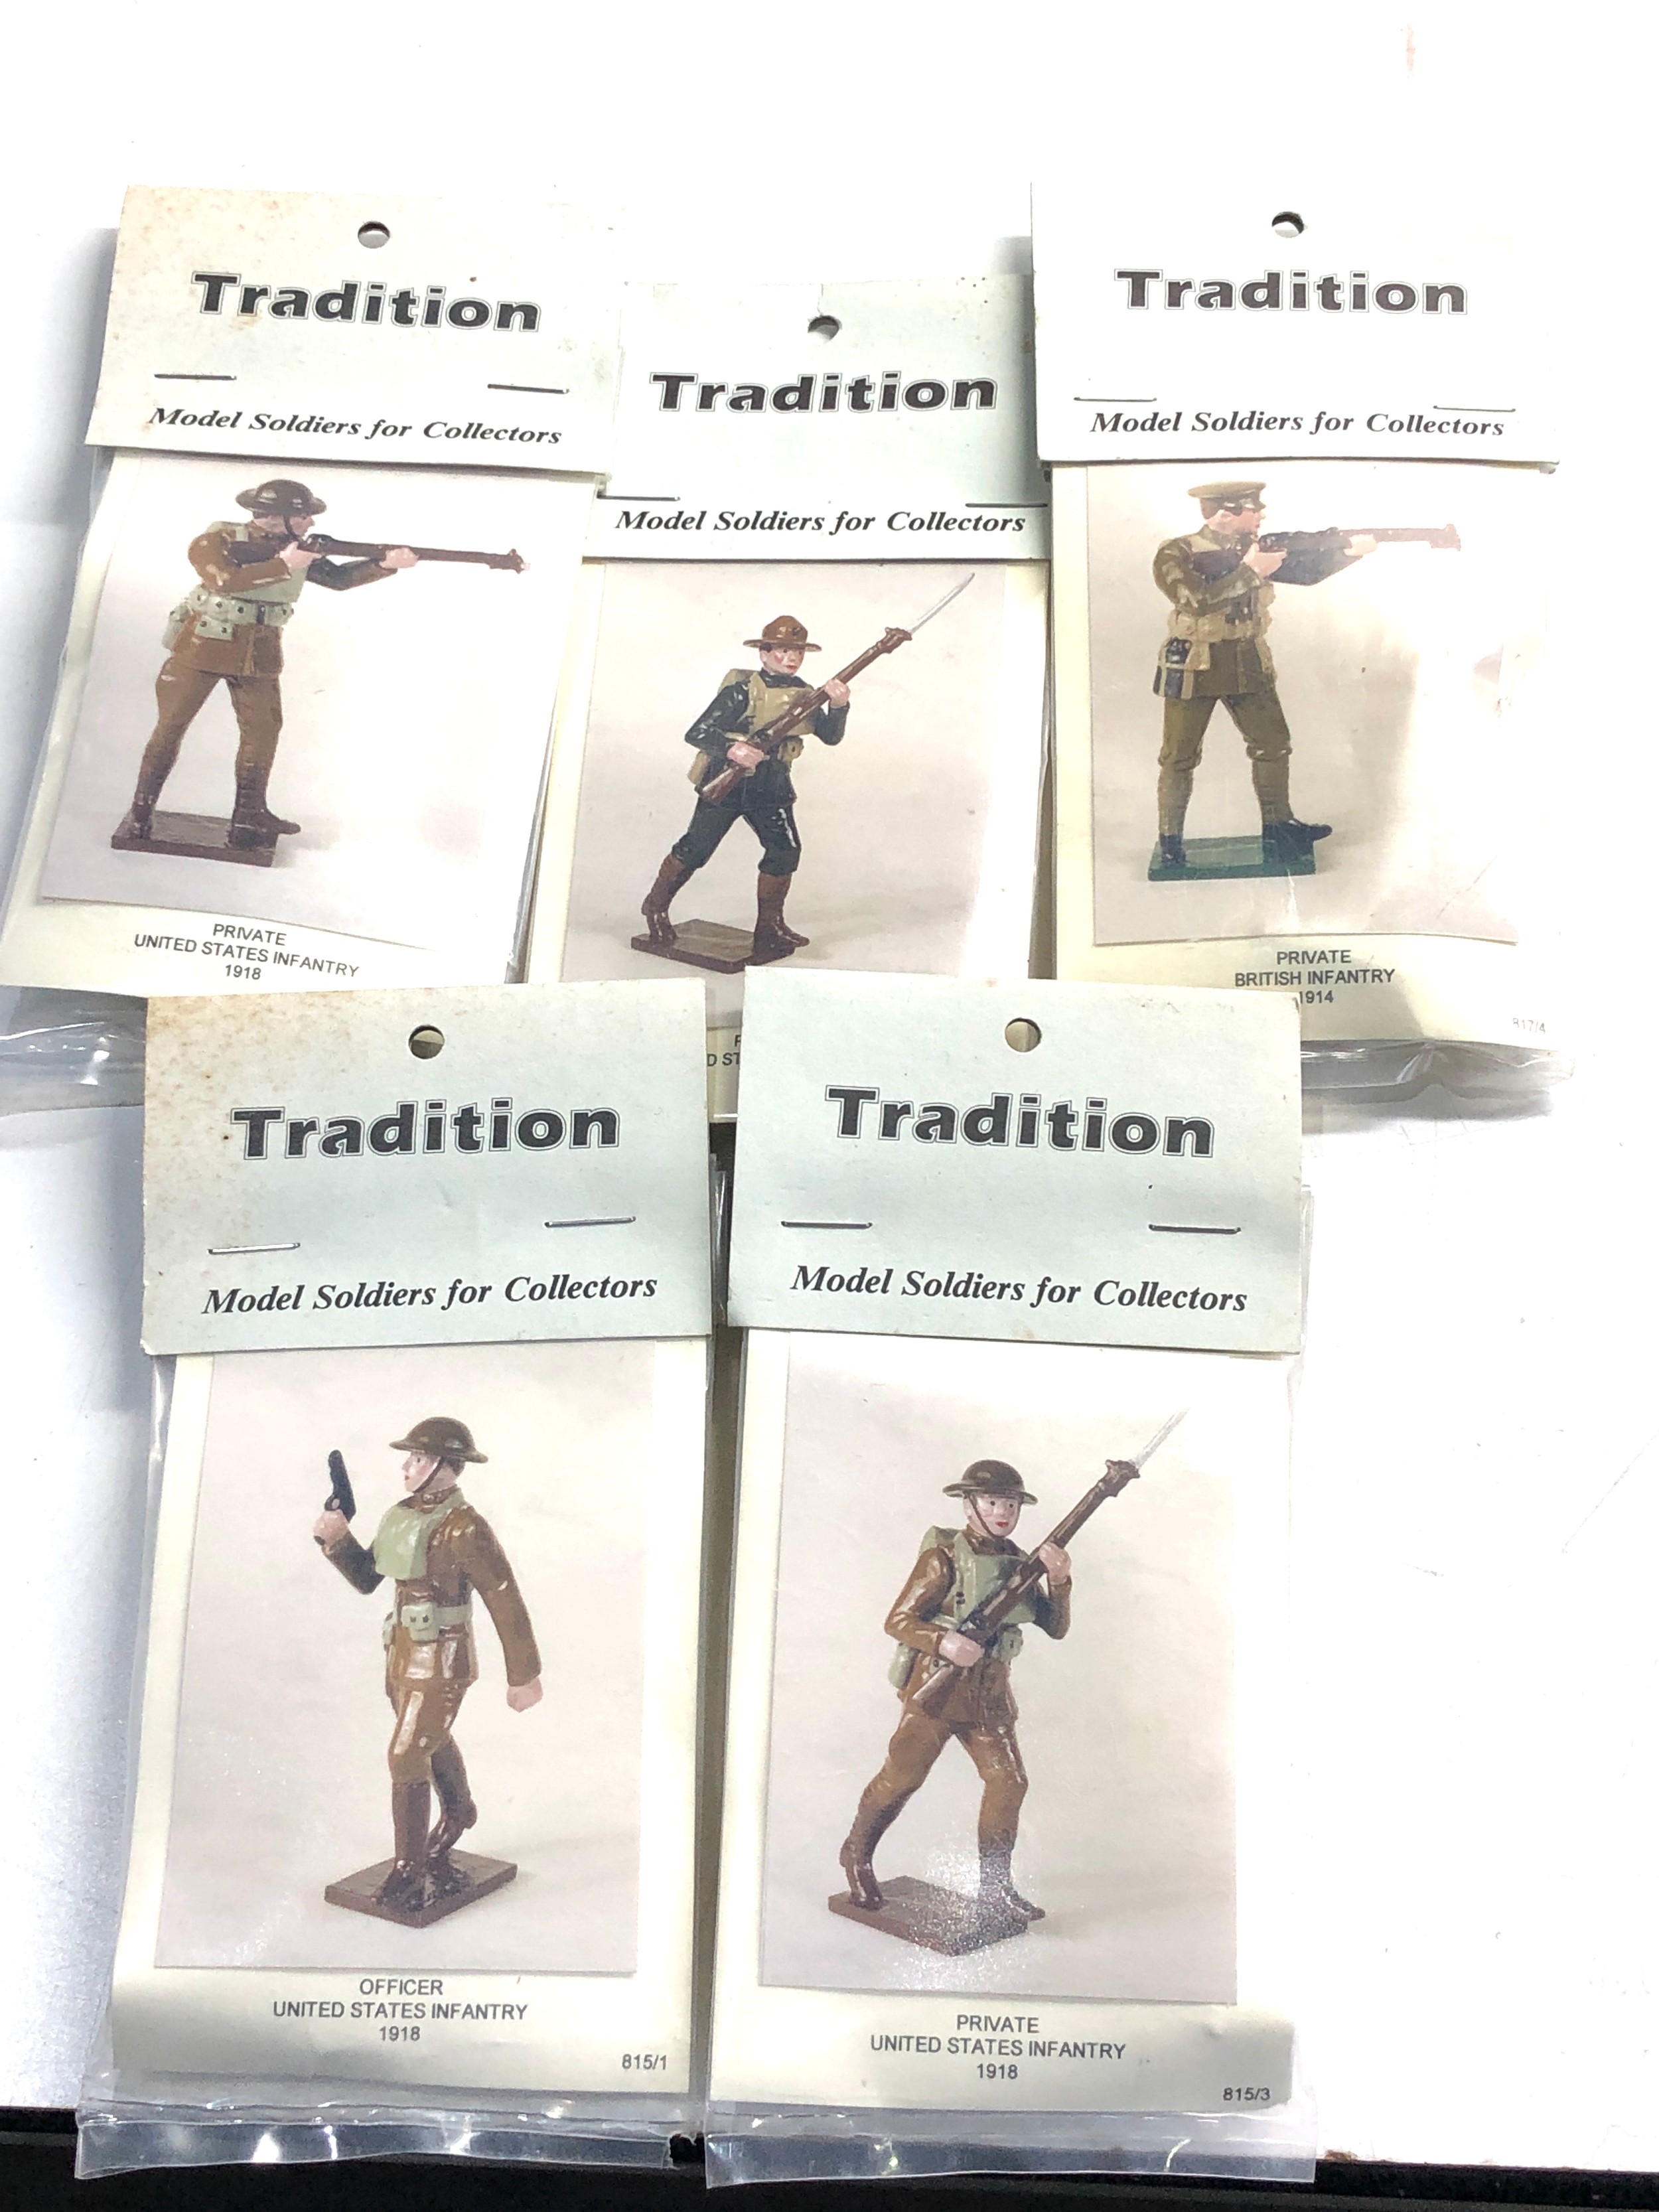 Vintage Tradition collectors lead model soldiers in original packaging